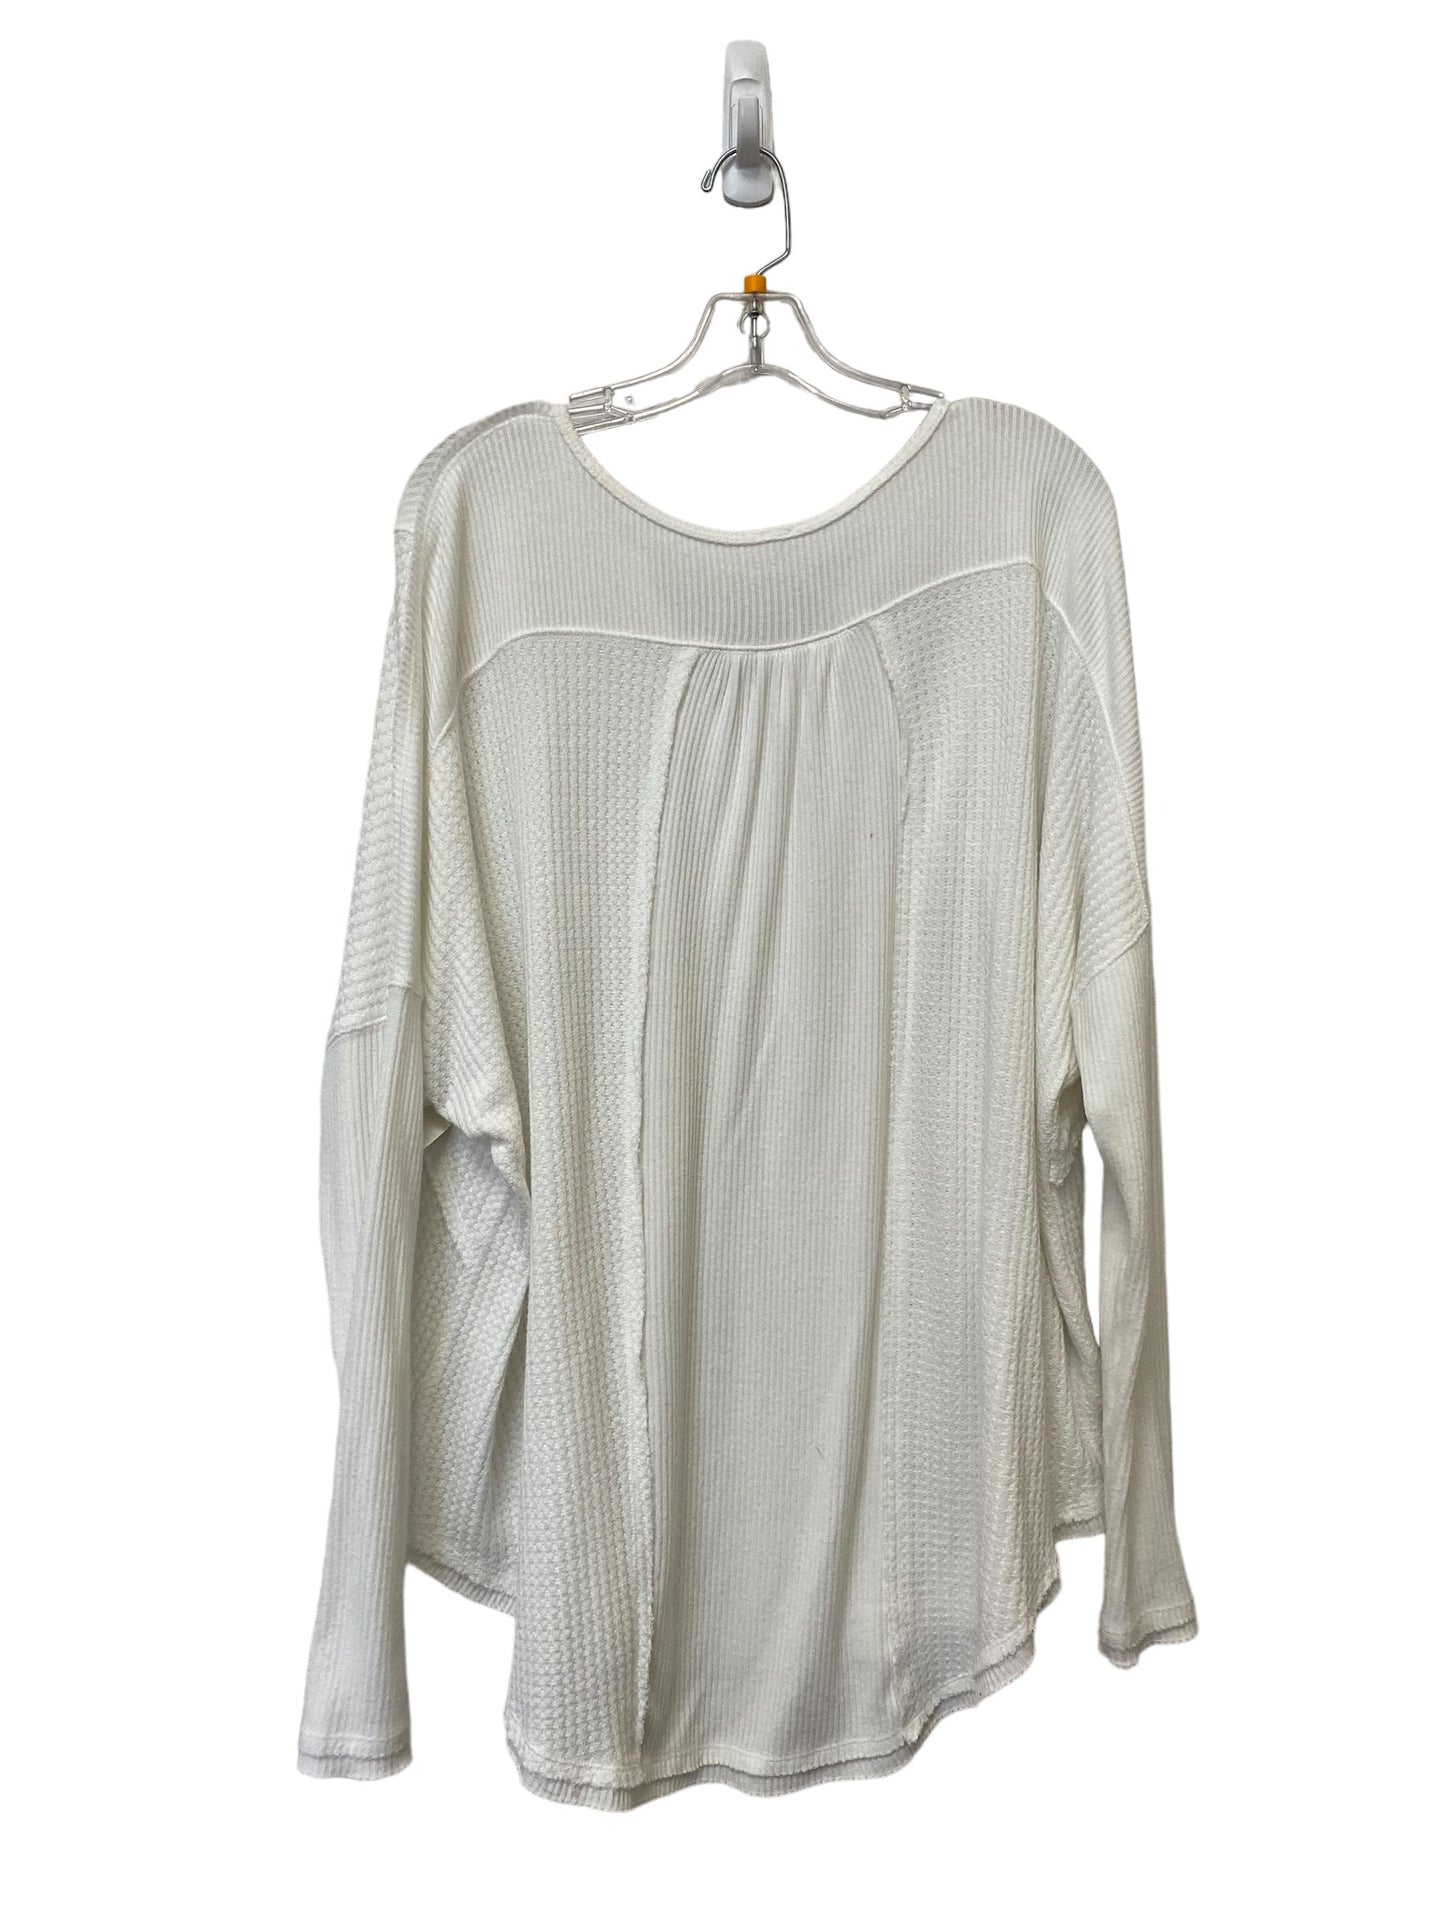 White Top Long Sleeve Free People, Size L